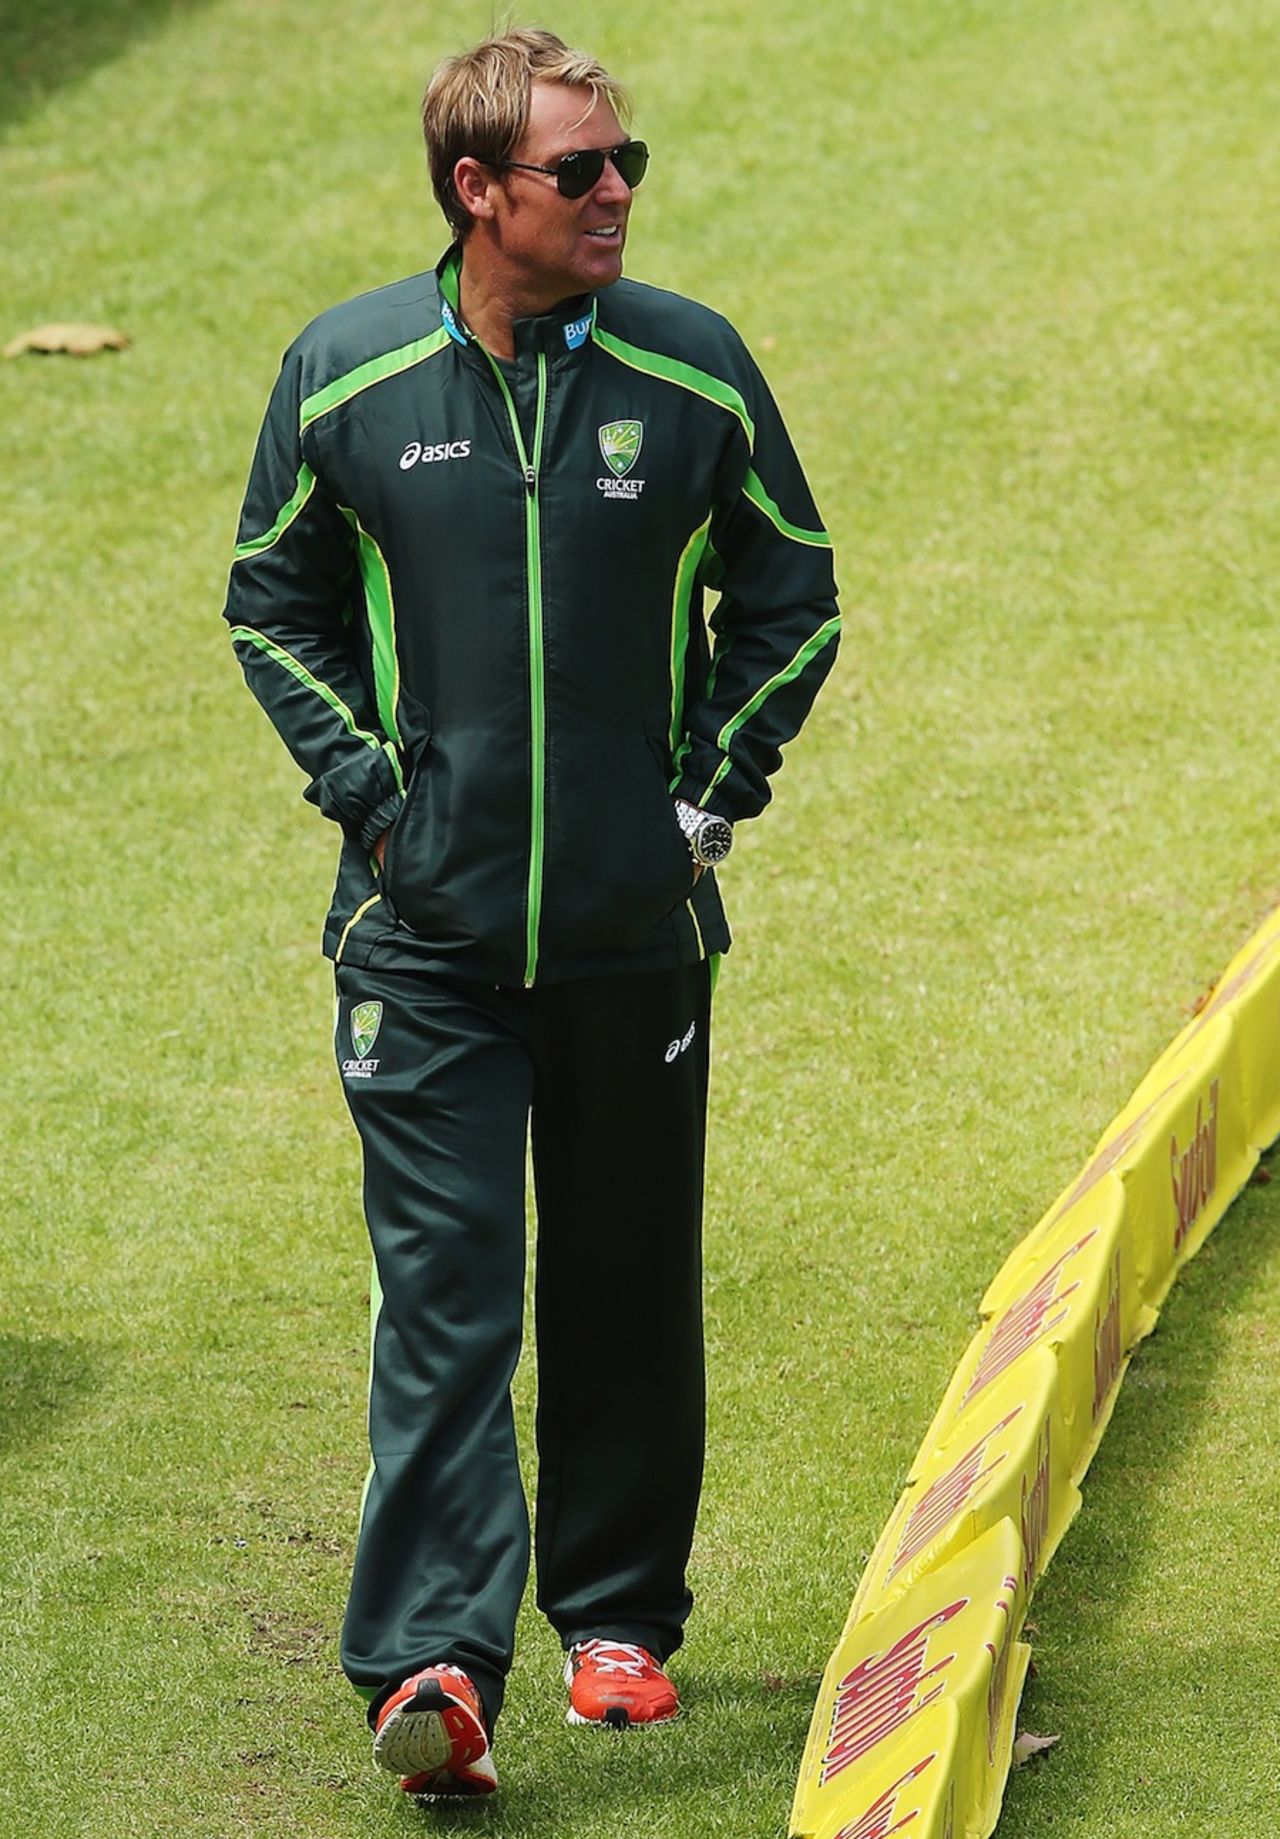 Shane Warne walks along the boundary line, South Africa v Australia, 3rd Test, Cape Town, 3rd day, March 3, 2014